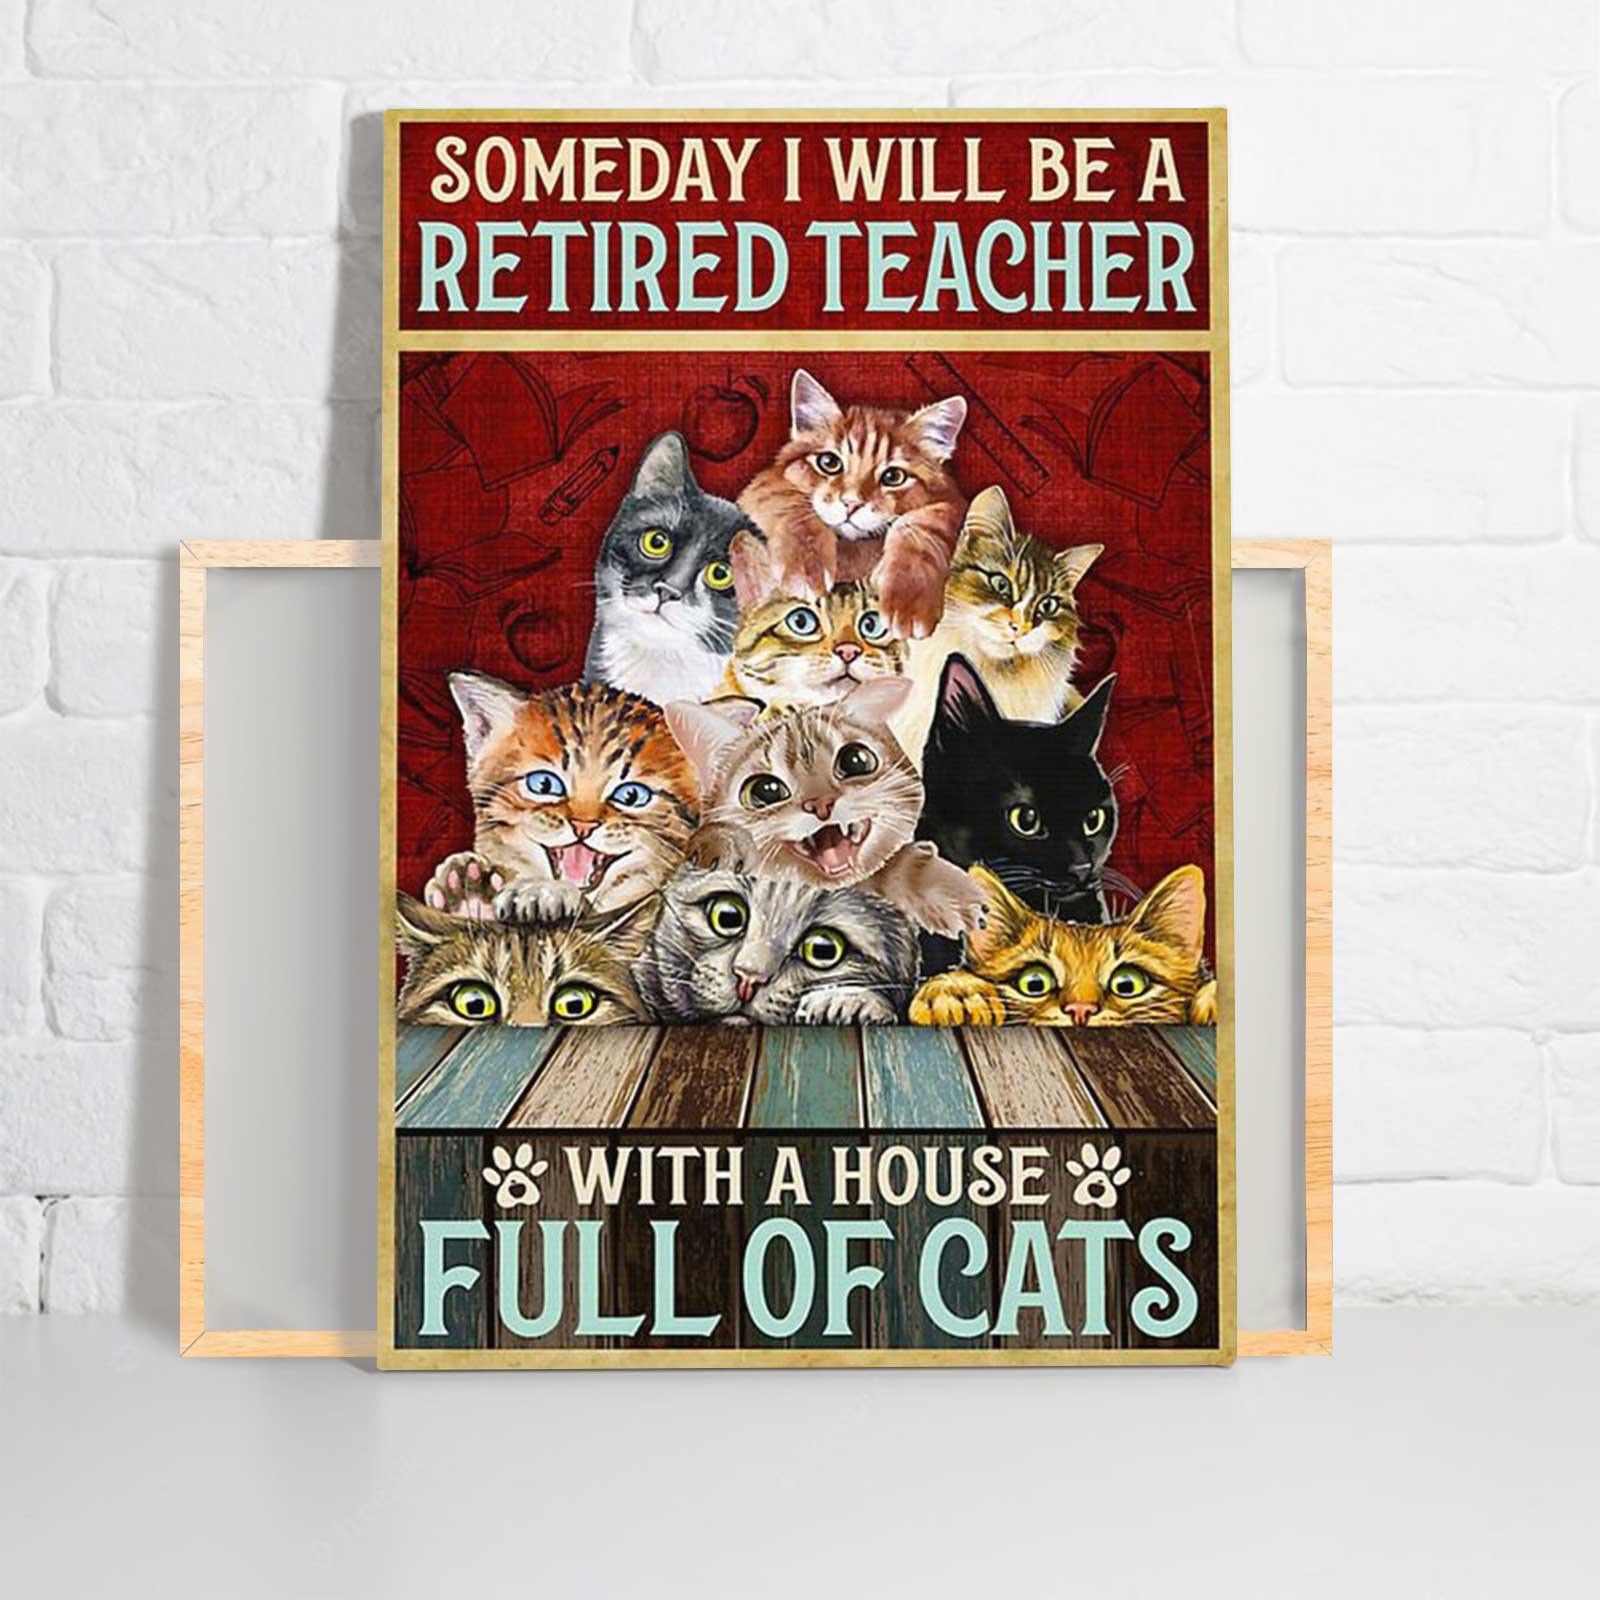 Cat Portrait Canvas - Someday I Will Be A Retired Teacher With A House Full Of Cats Portrait Canvas - Gift For Cat Lovers, Cat Owner, Friends, Family - Amzanimalsgift